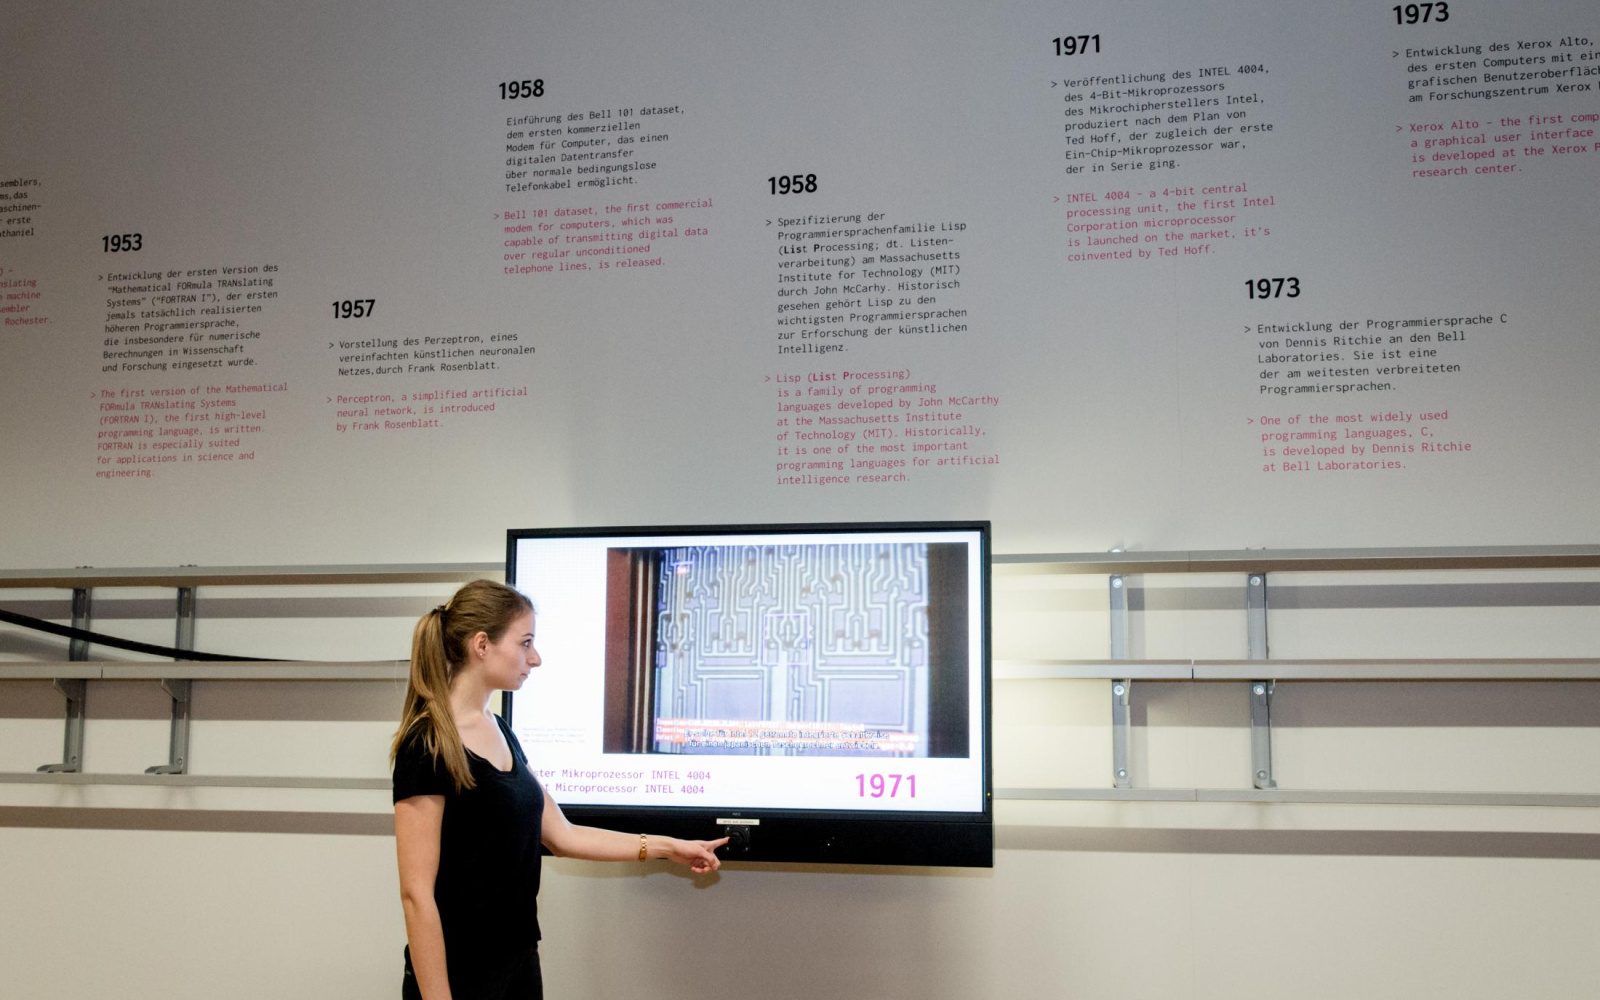 The picture shows a half-profile woman operating the virtual timeline of the »genalogy of the digital code«. On the wall, where the screen is mounted on a movable rail, you can see an information graphic